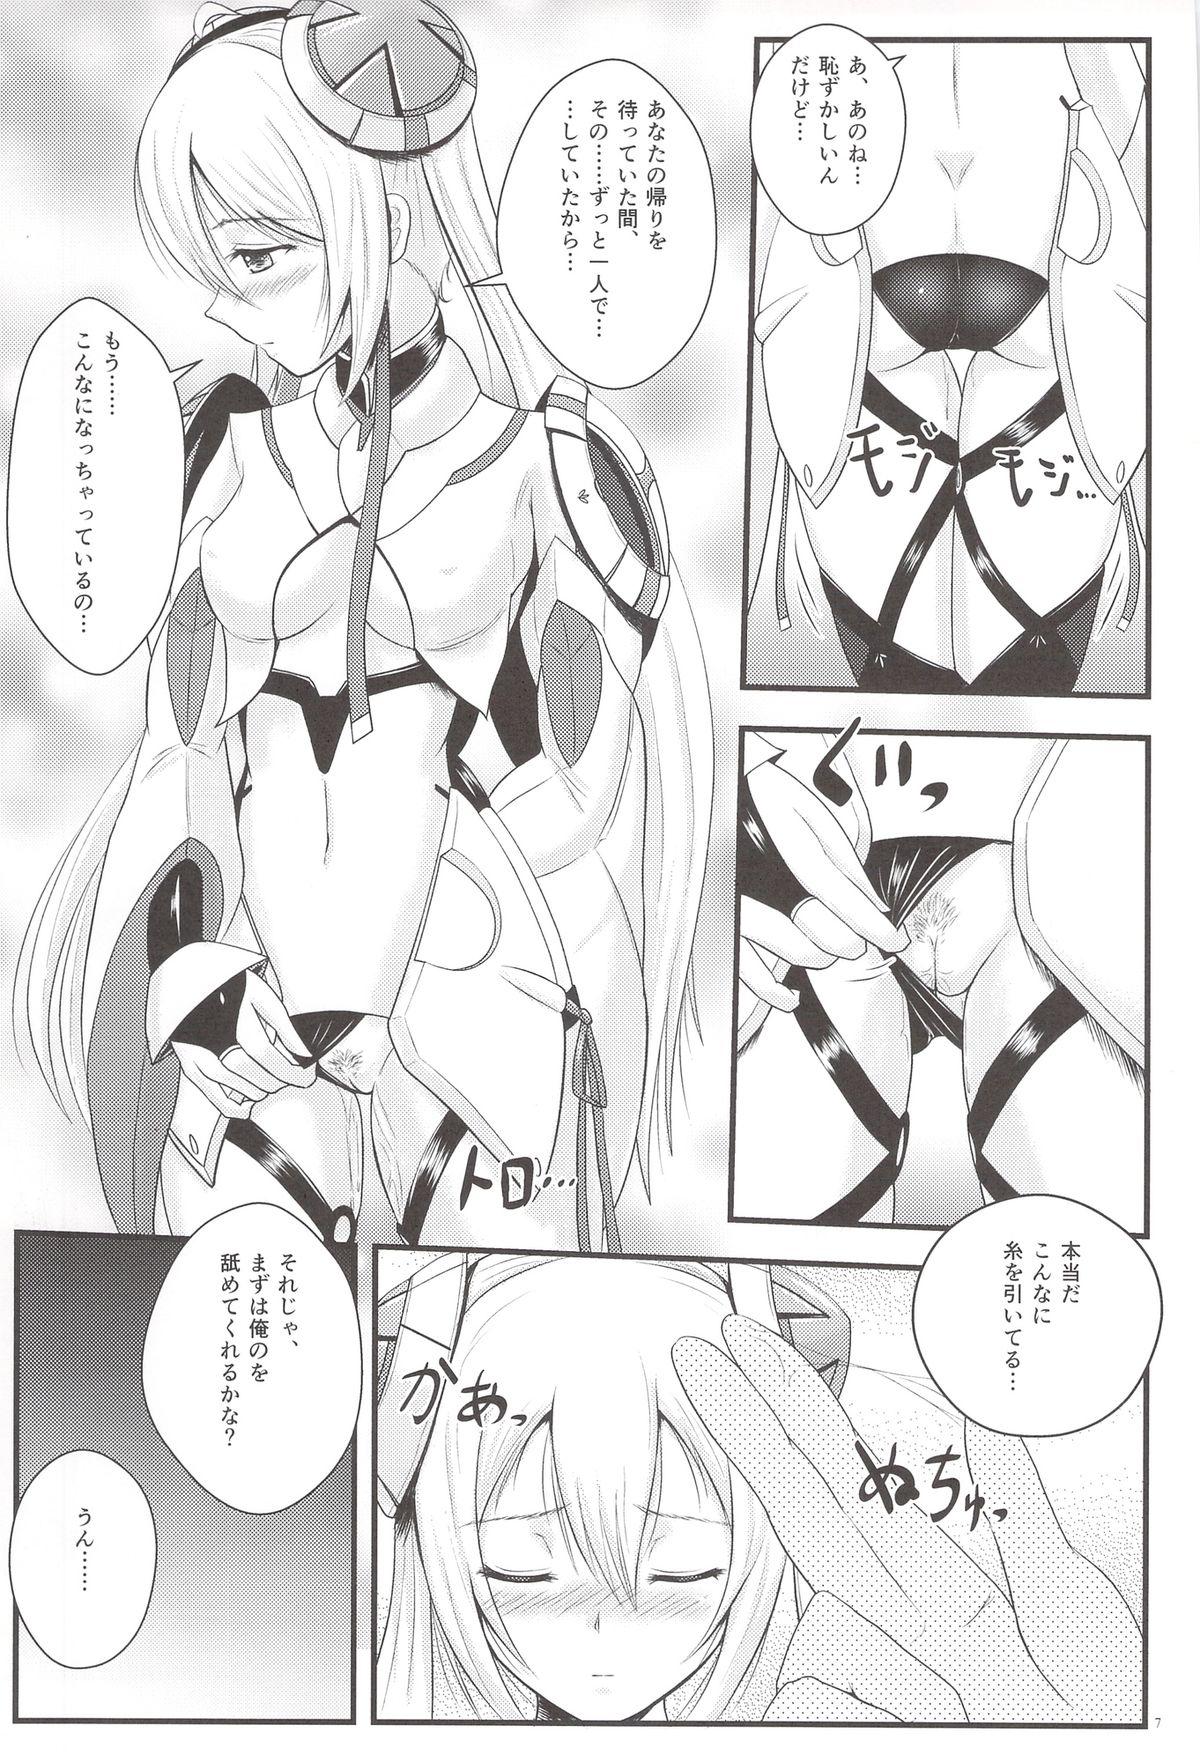 Bareback When I think of you - Phantasy star online 2 Real Amatuer Porn - Page 6